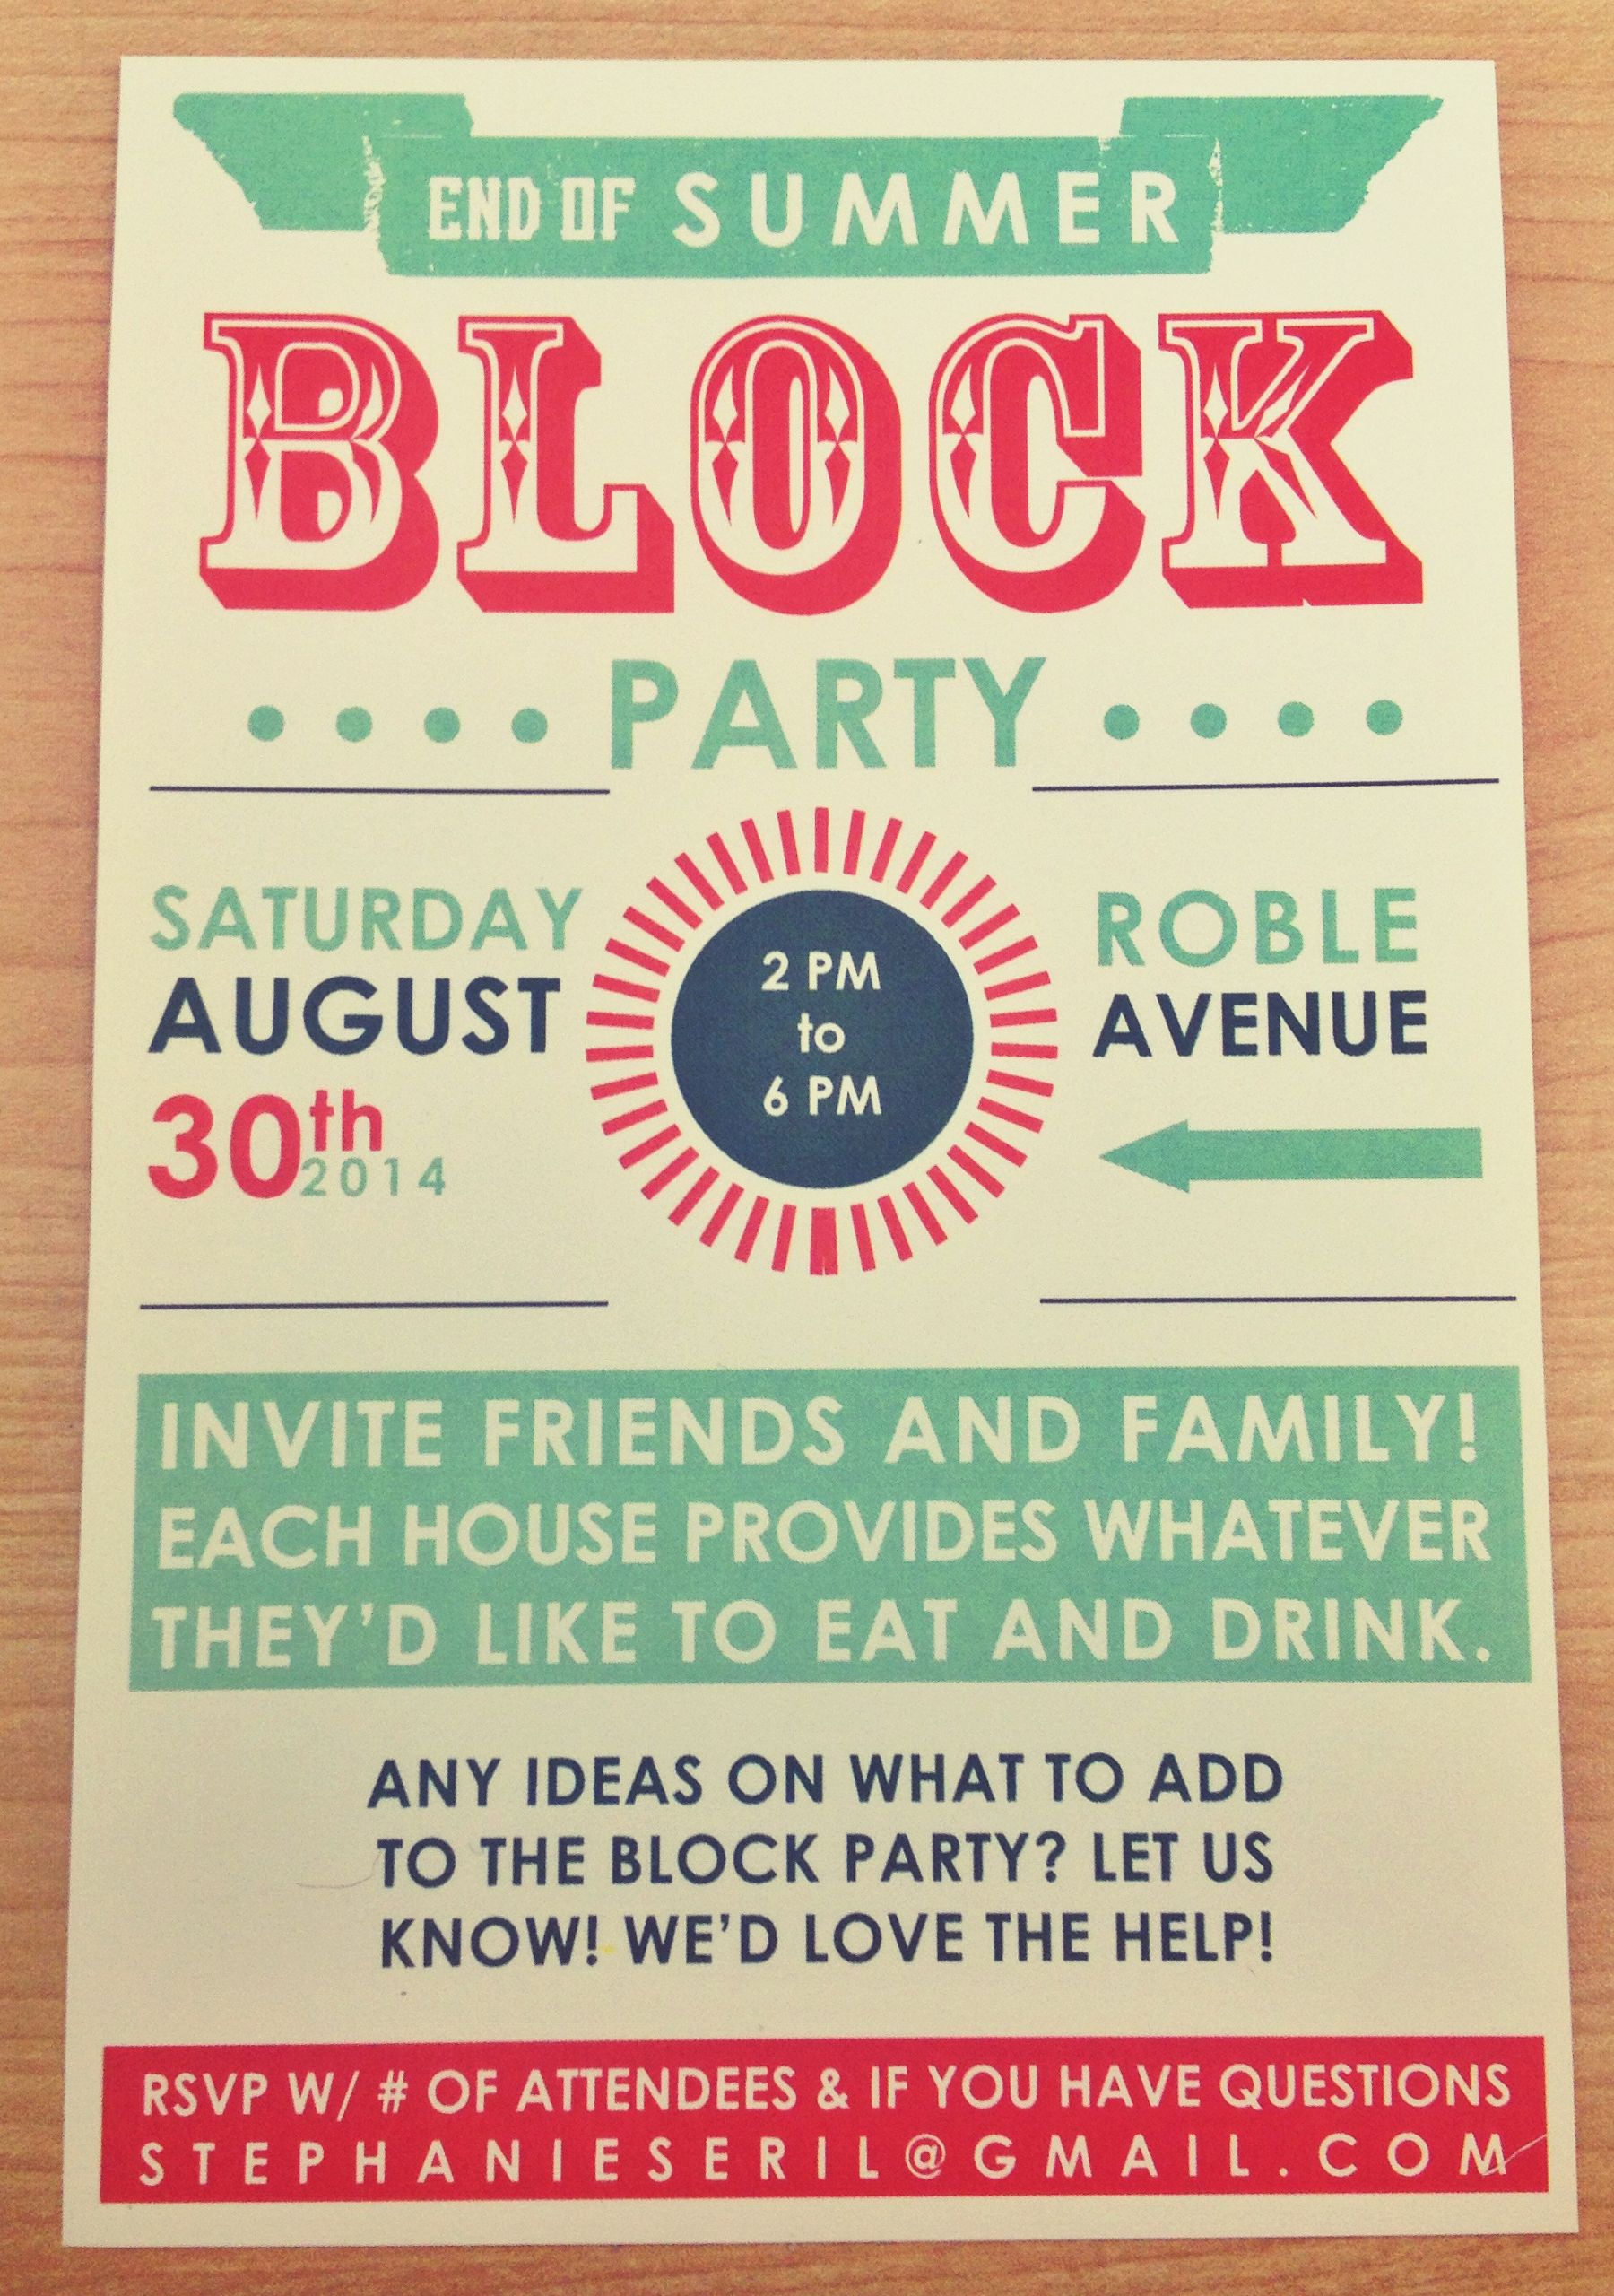 End Of Summer Party Invites
 End of Summer Block Party